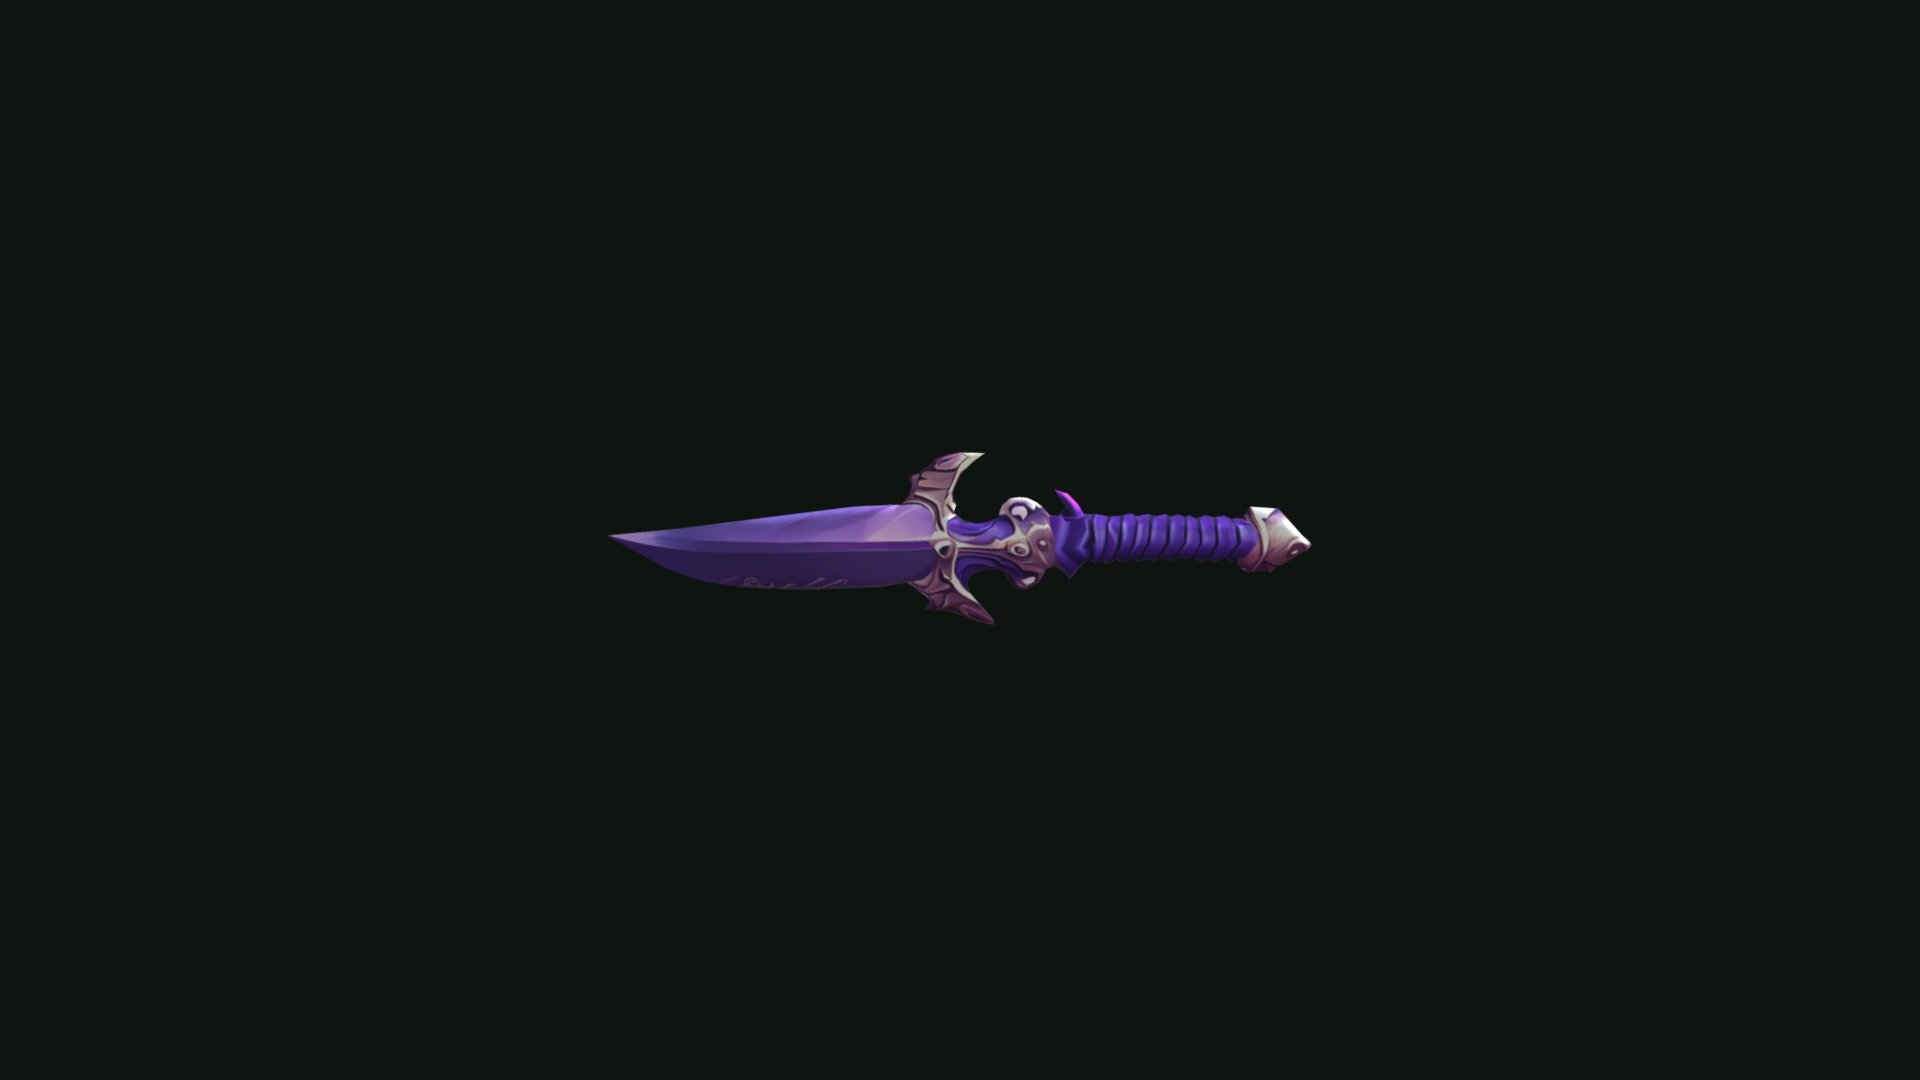 The original dagger
Free
Low poly
Кeady to play - Dagger_low - Download Free 3D model by EvgeshQa (@uchaikineugene) 3d model